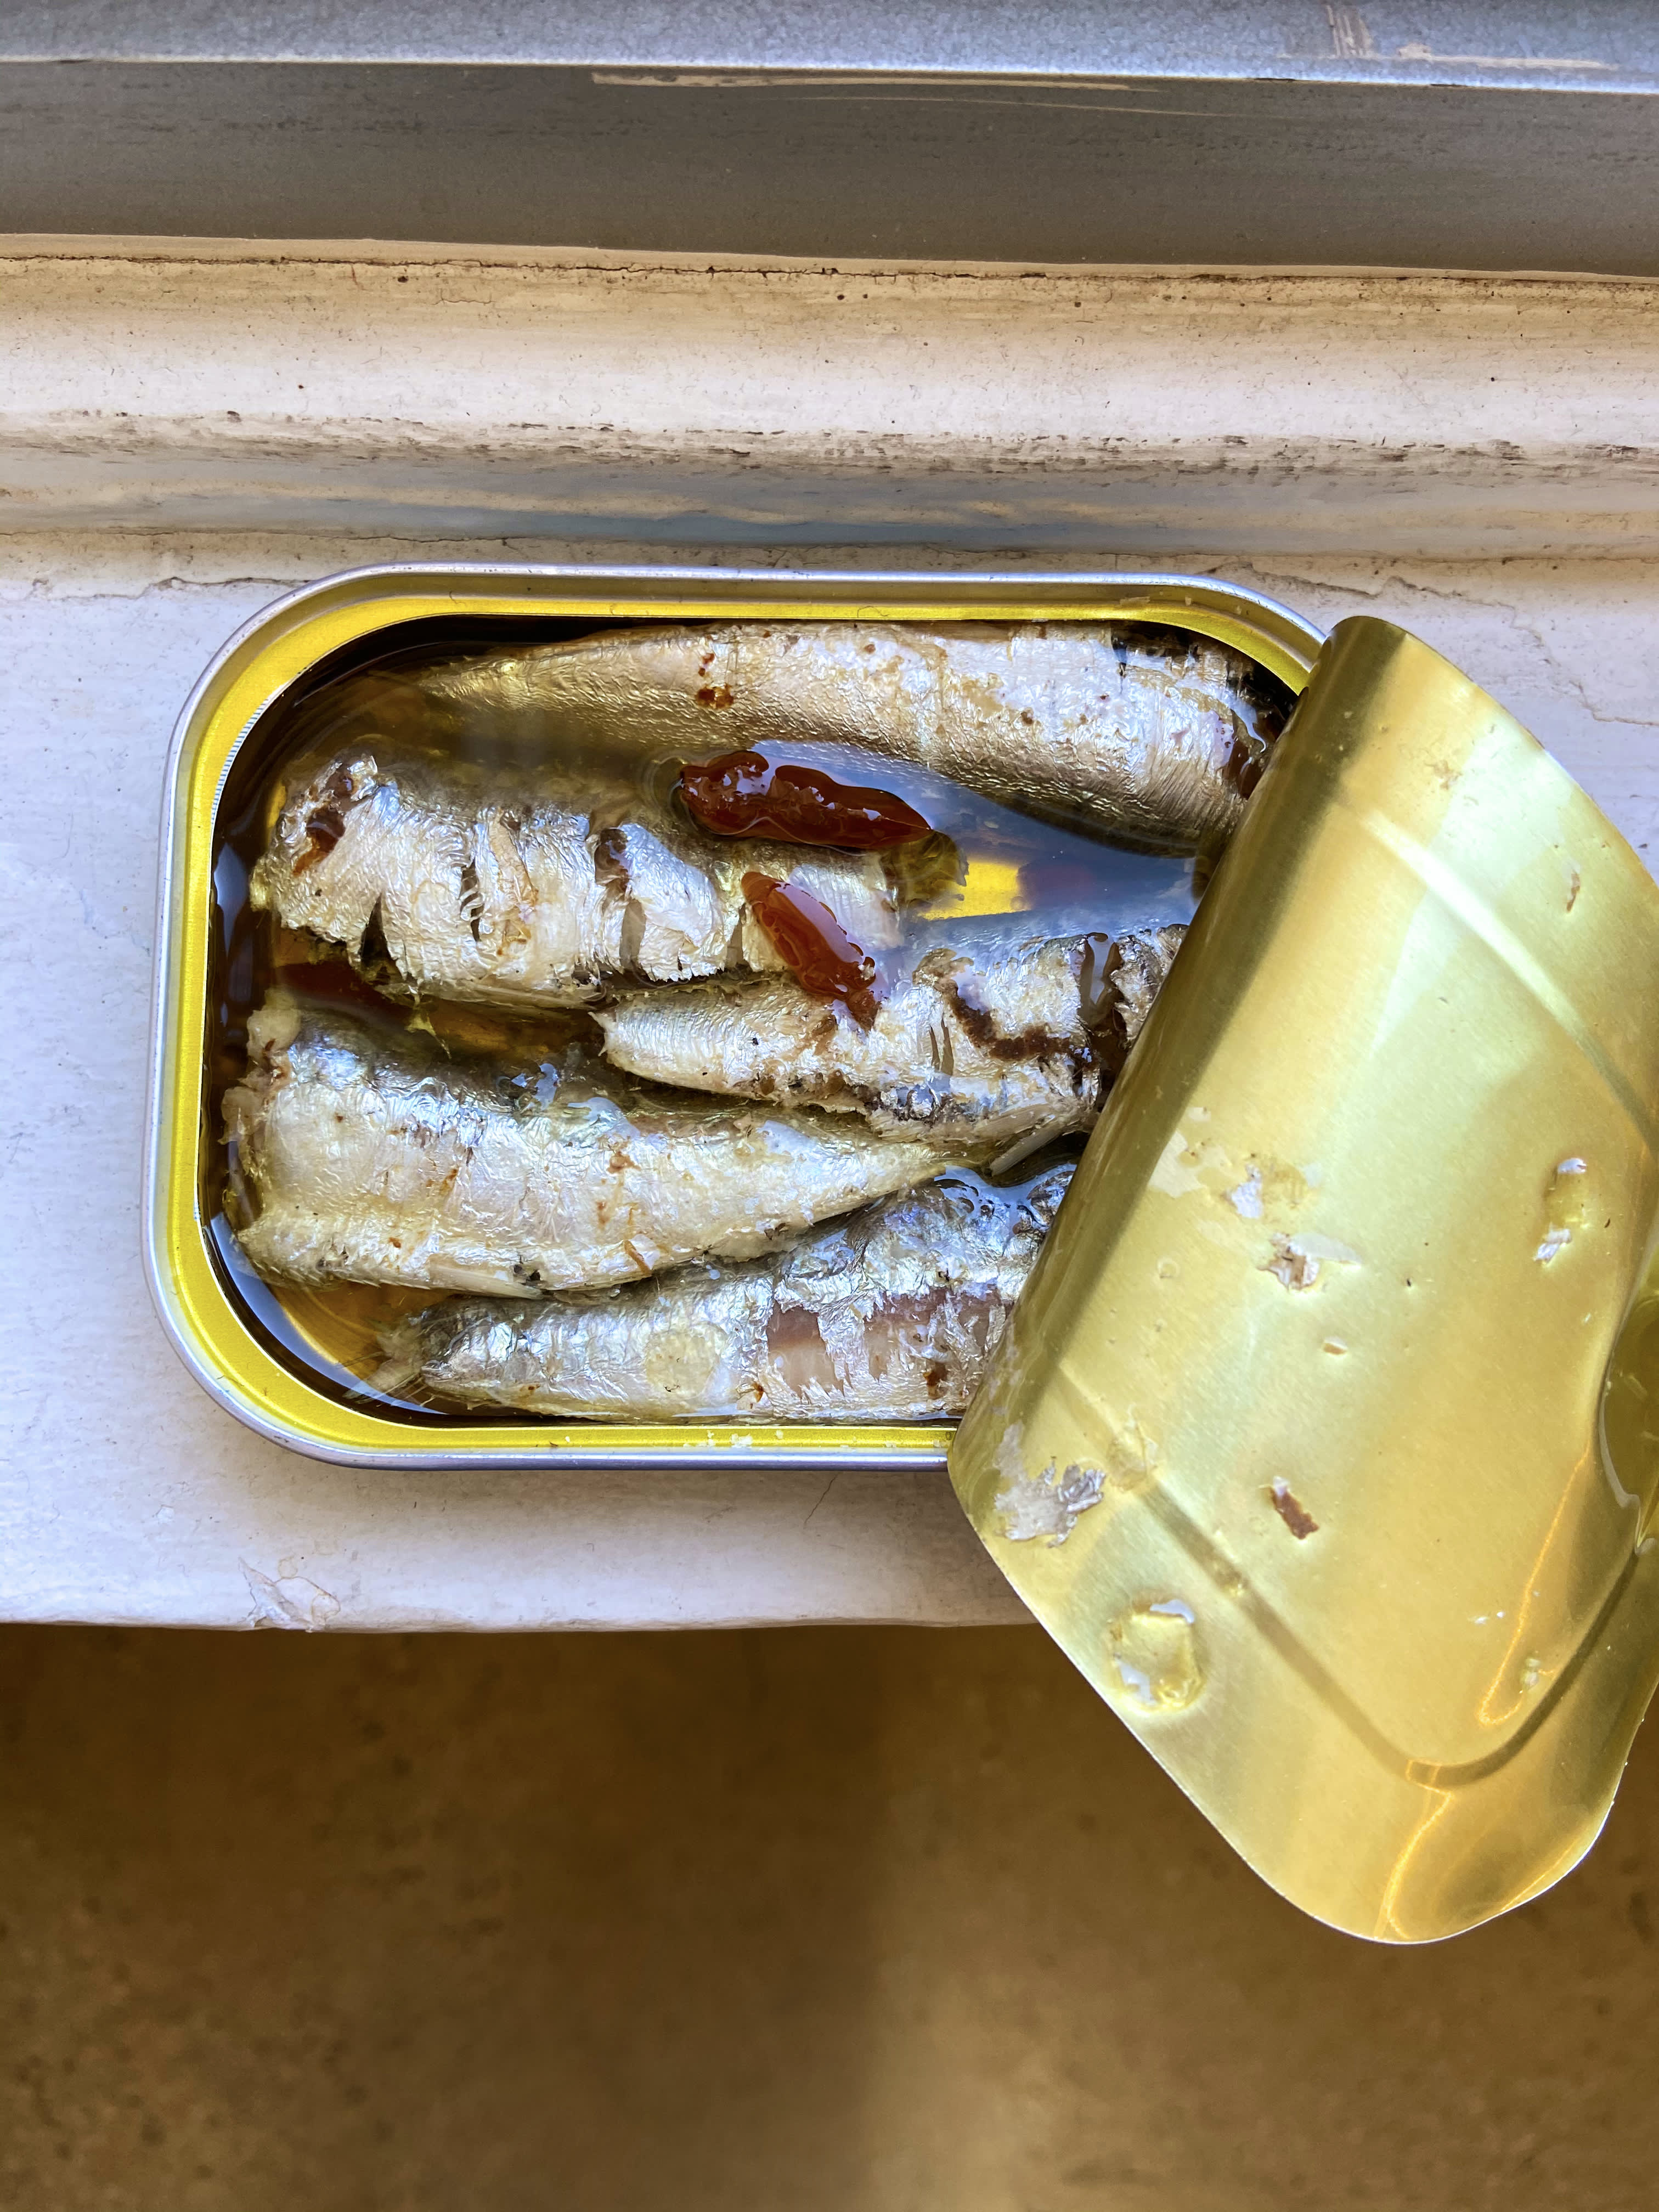 canned sardines recipes